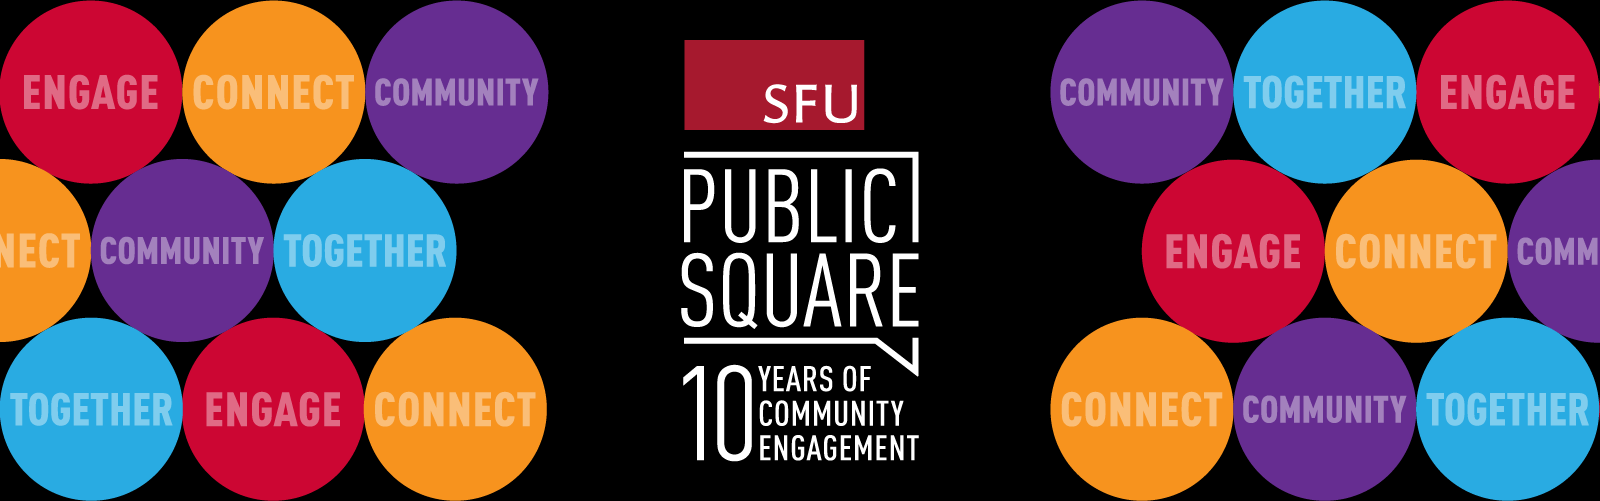 A white SFU Public Square logo appears on a black background with text reading 10 years of community engagement below. An arrangement of blue, purple, orange and red circles appear on both sides of the image, and within each circle is the text engage, community, connect or together, a now to SFU Public Square's first community summit in 2012.